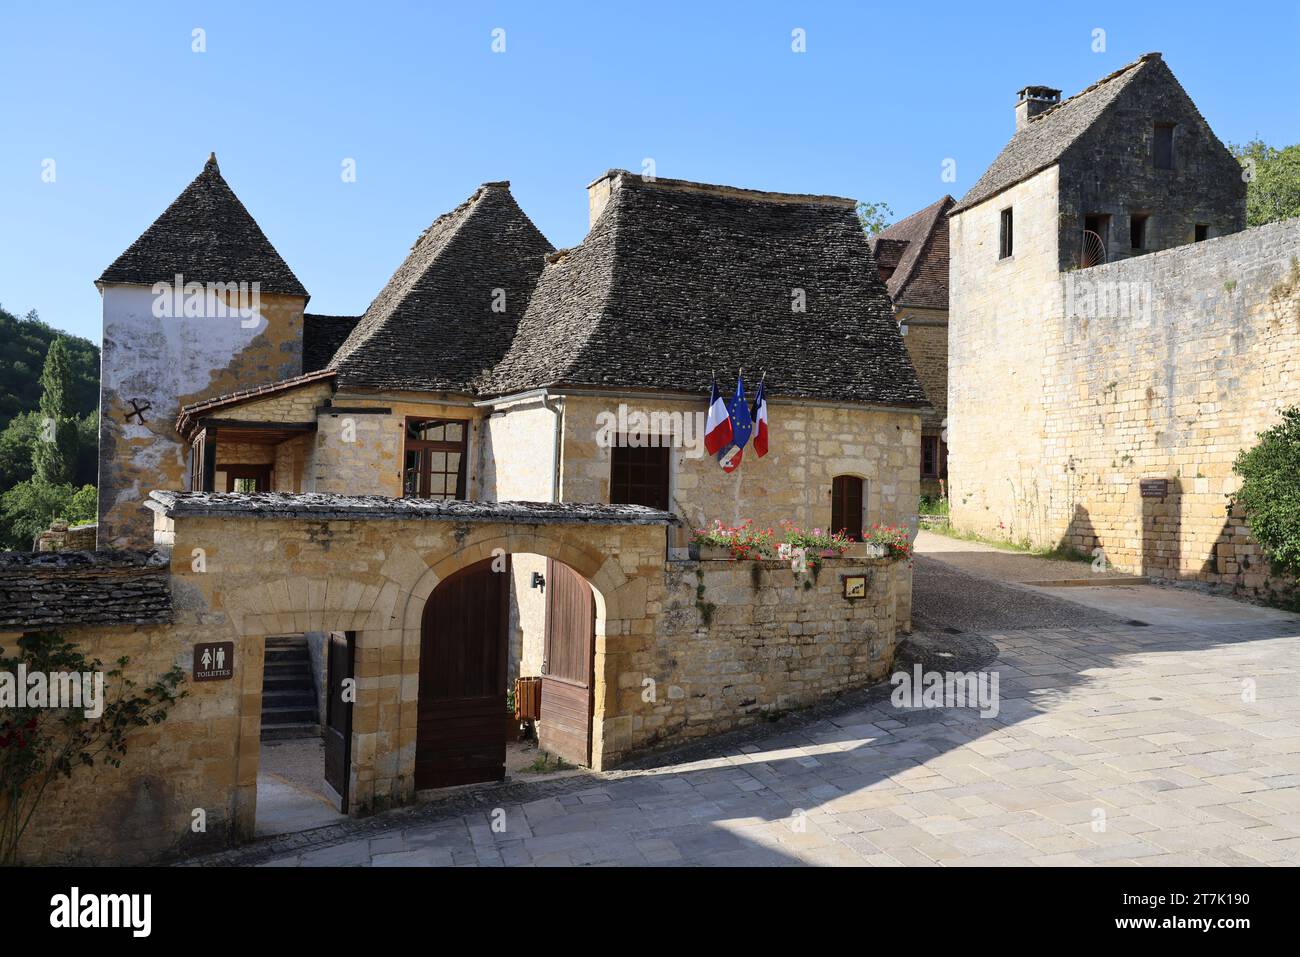 Saint-Amand-de-Coly (Coly-Saint-Amand) in Périgord Noir is classified among the most beautiful villages in France. History, Abbey, fortified church, a Stock Photo